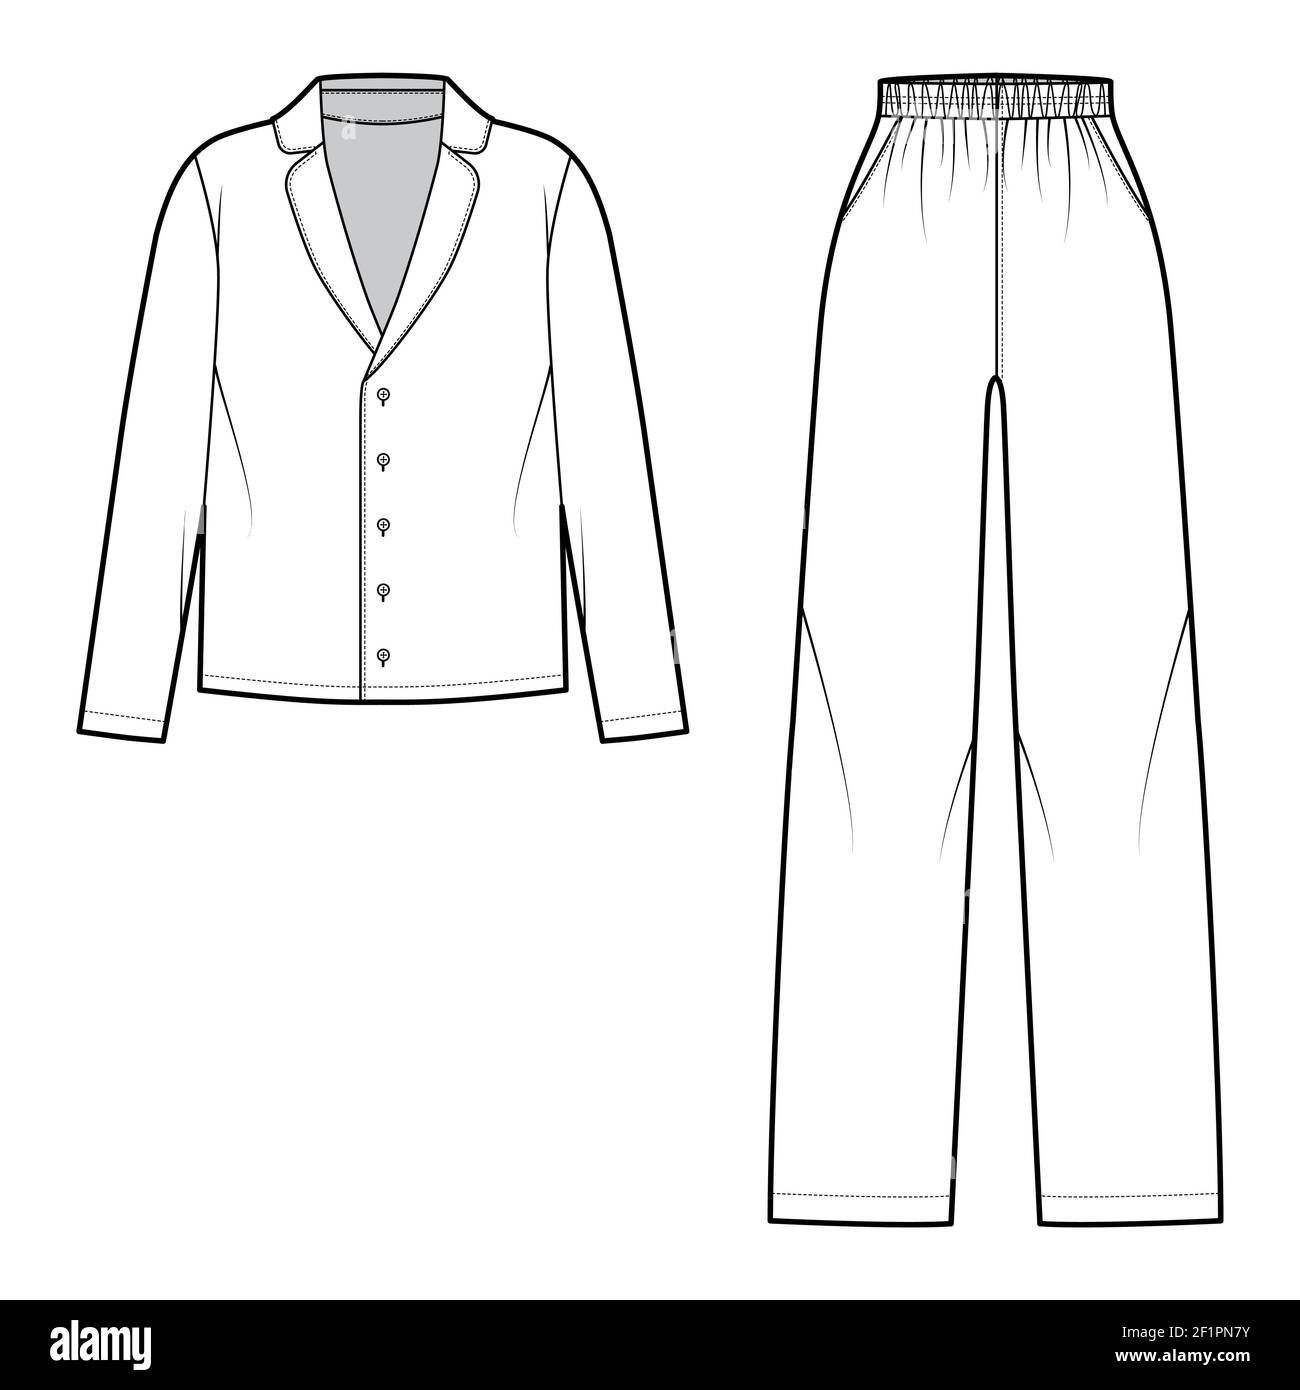 Set of Sleepwear Pajamas shirt, pants technical fashion illustration with  full length, normal waist, oversized, button closure, long sleeves. Flat  front, white color style. Women men unisex CAD mockup Stock Vector Image